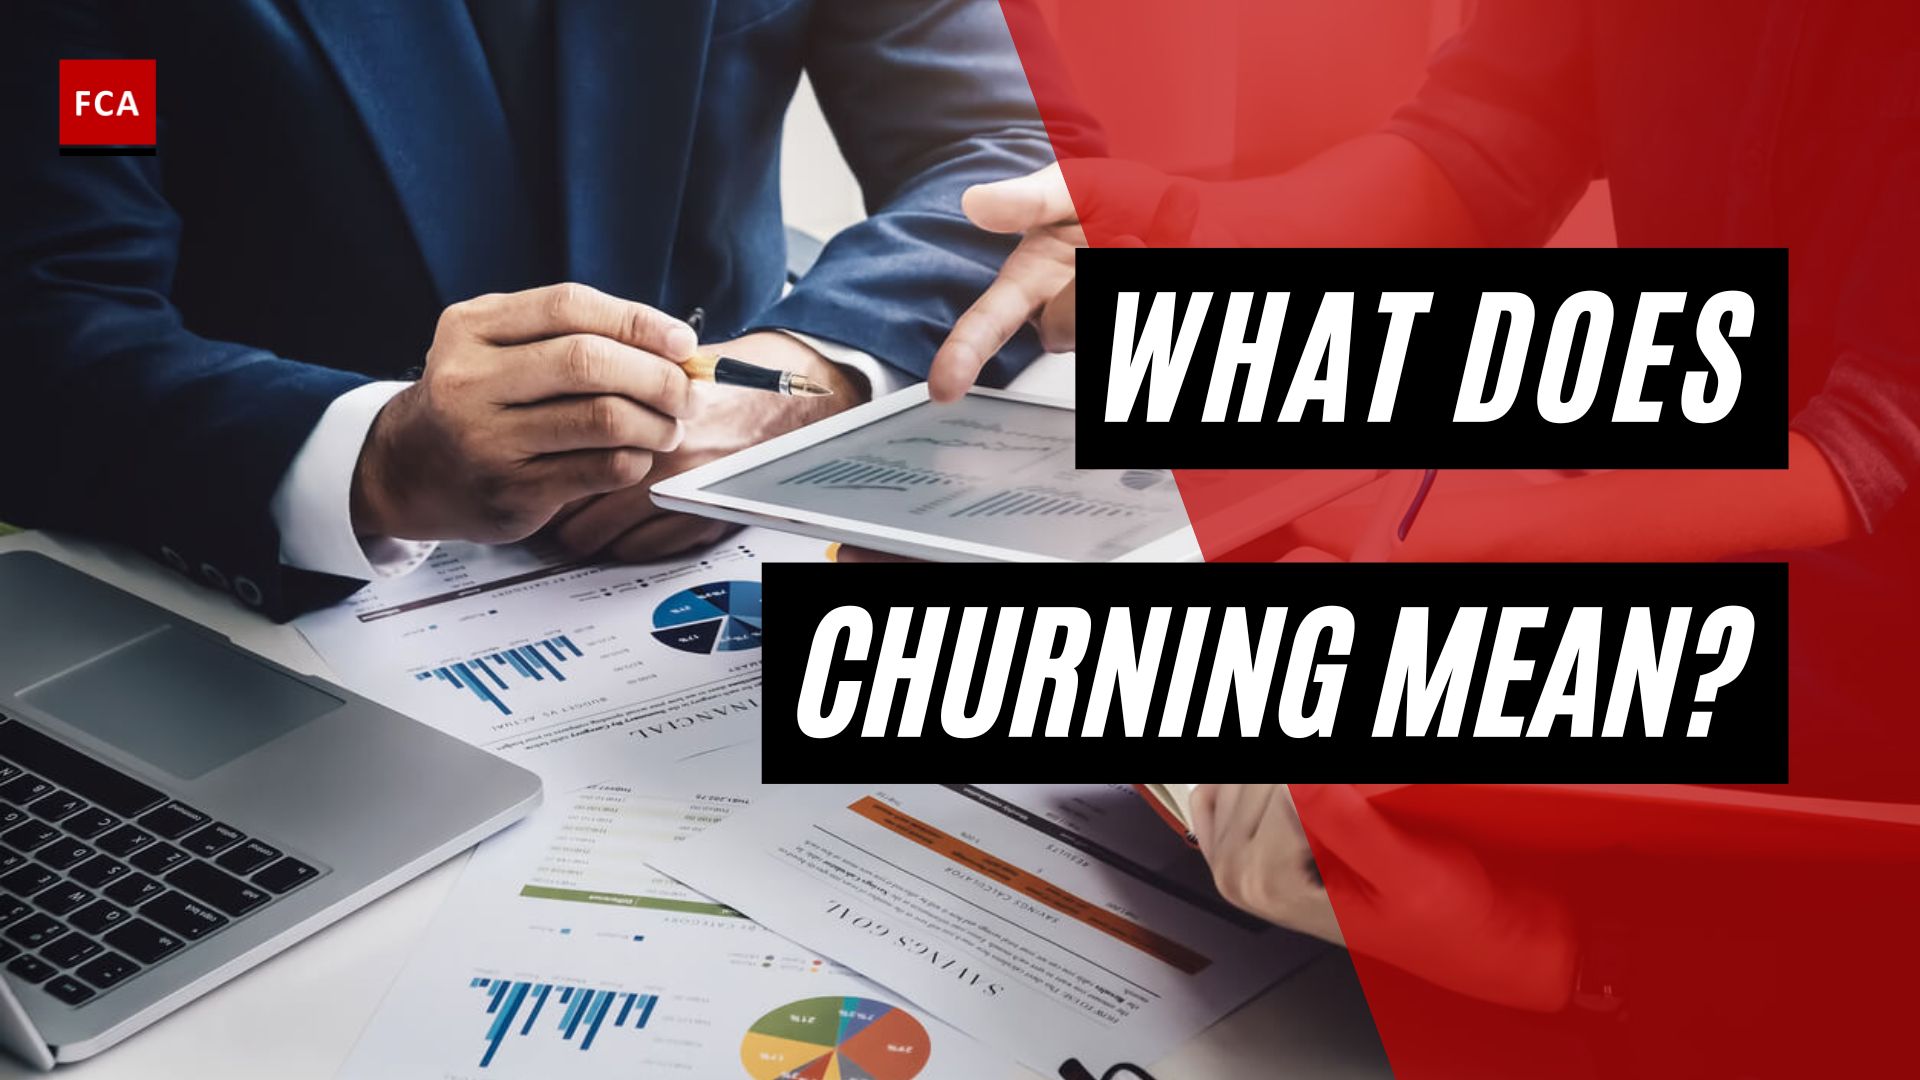 What Does Churning Mean?